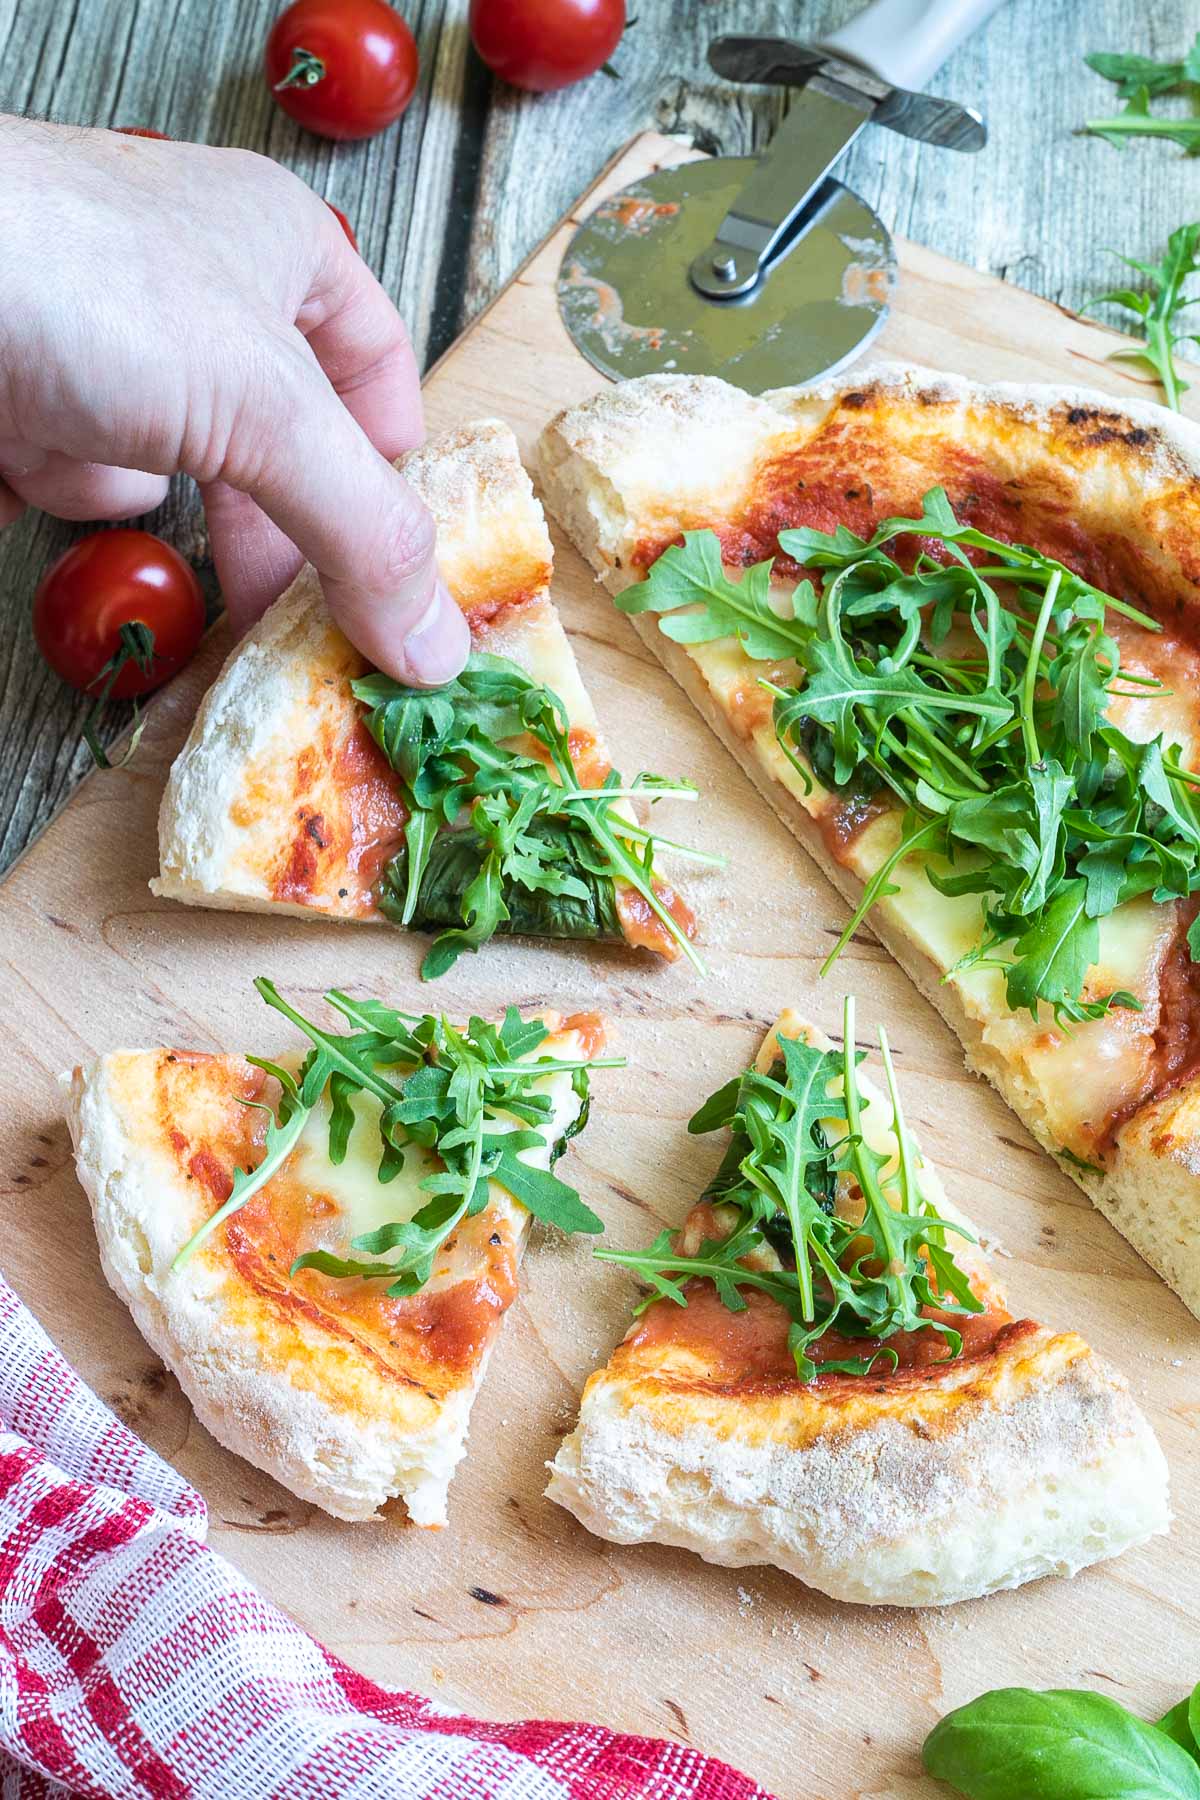 A pizza cut into slices with fluffy crispy crust topped with tomato sauce, melted cheese and fresh arugula on a wooden board. A hand is taking one slice.